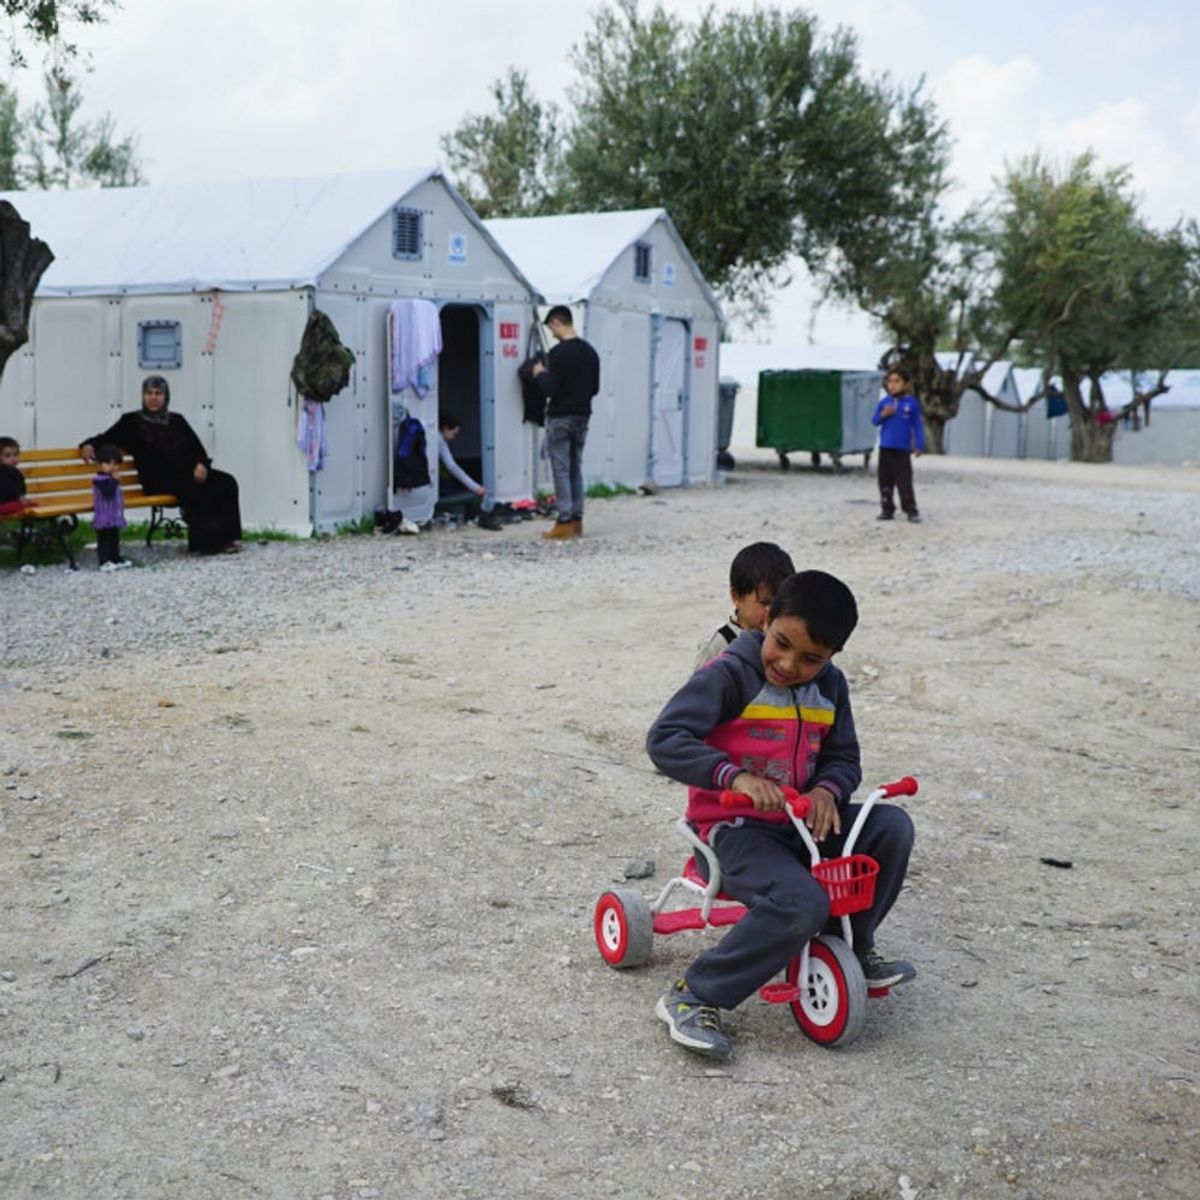 IKEA Is Helping Refugees in This Unique Way